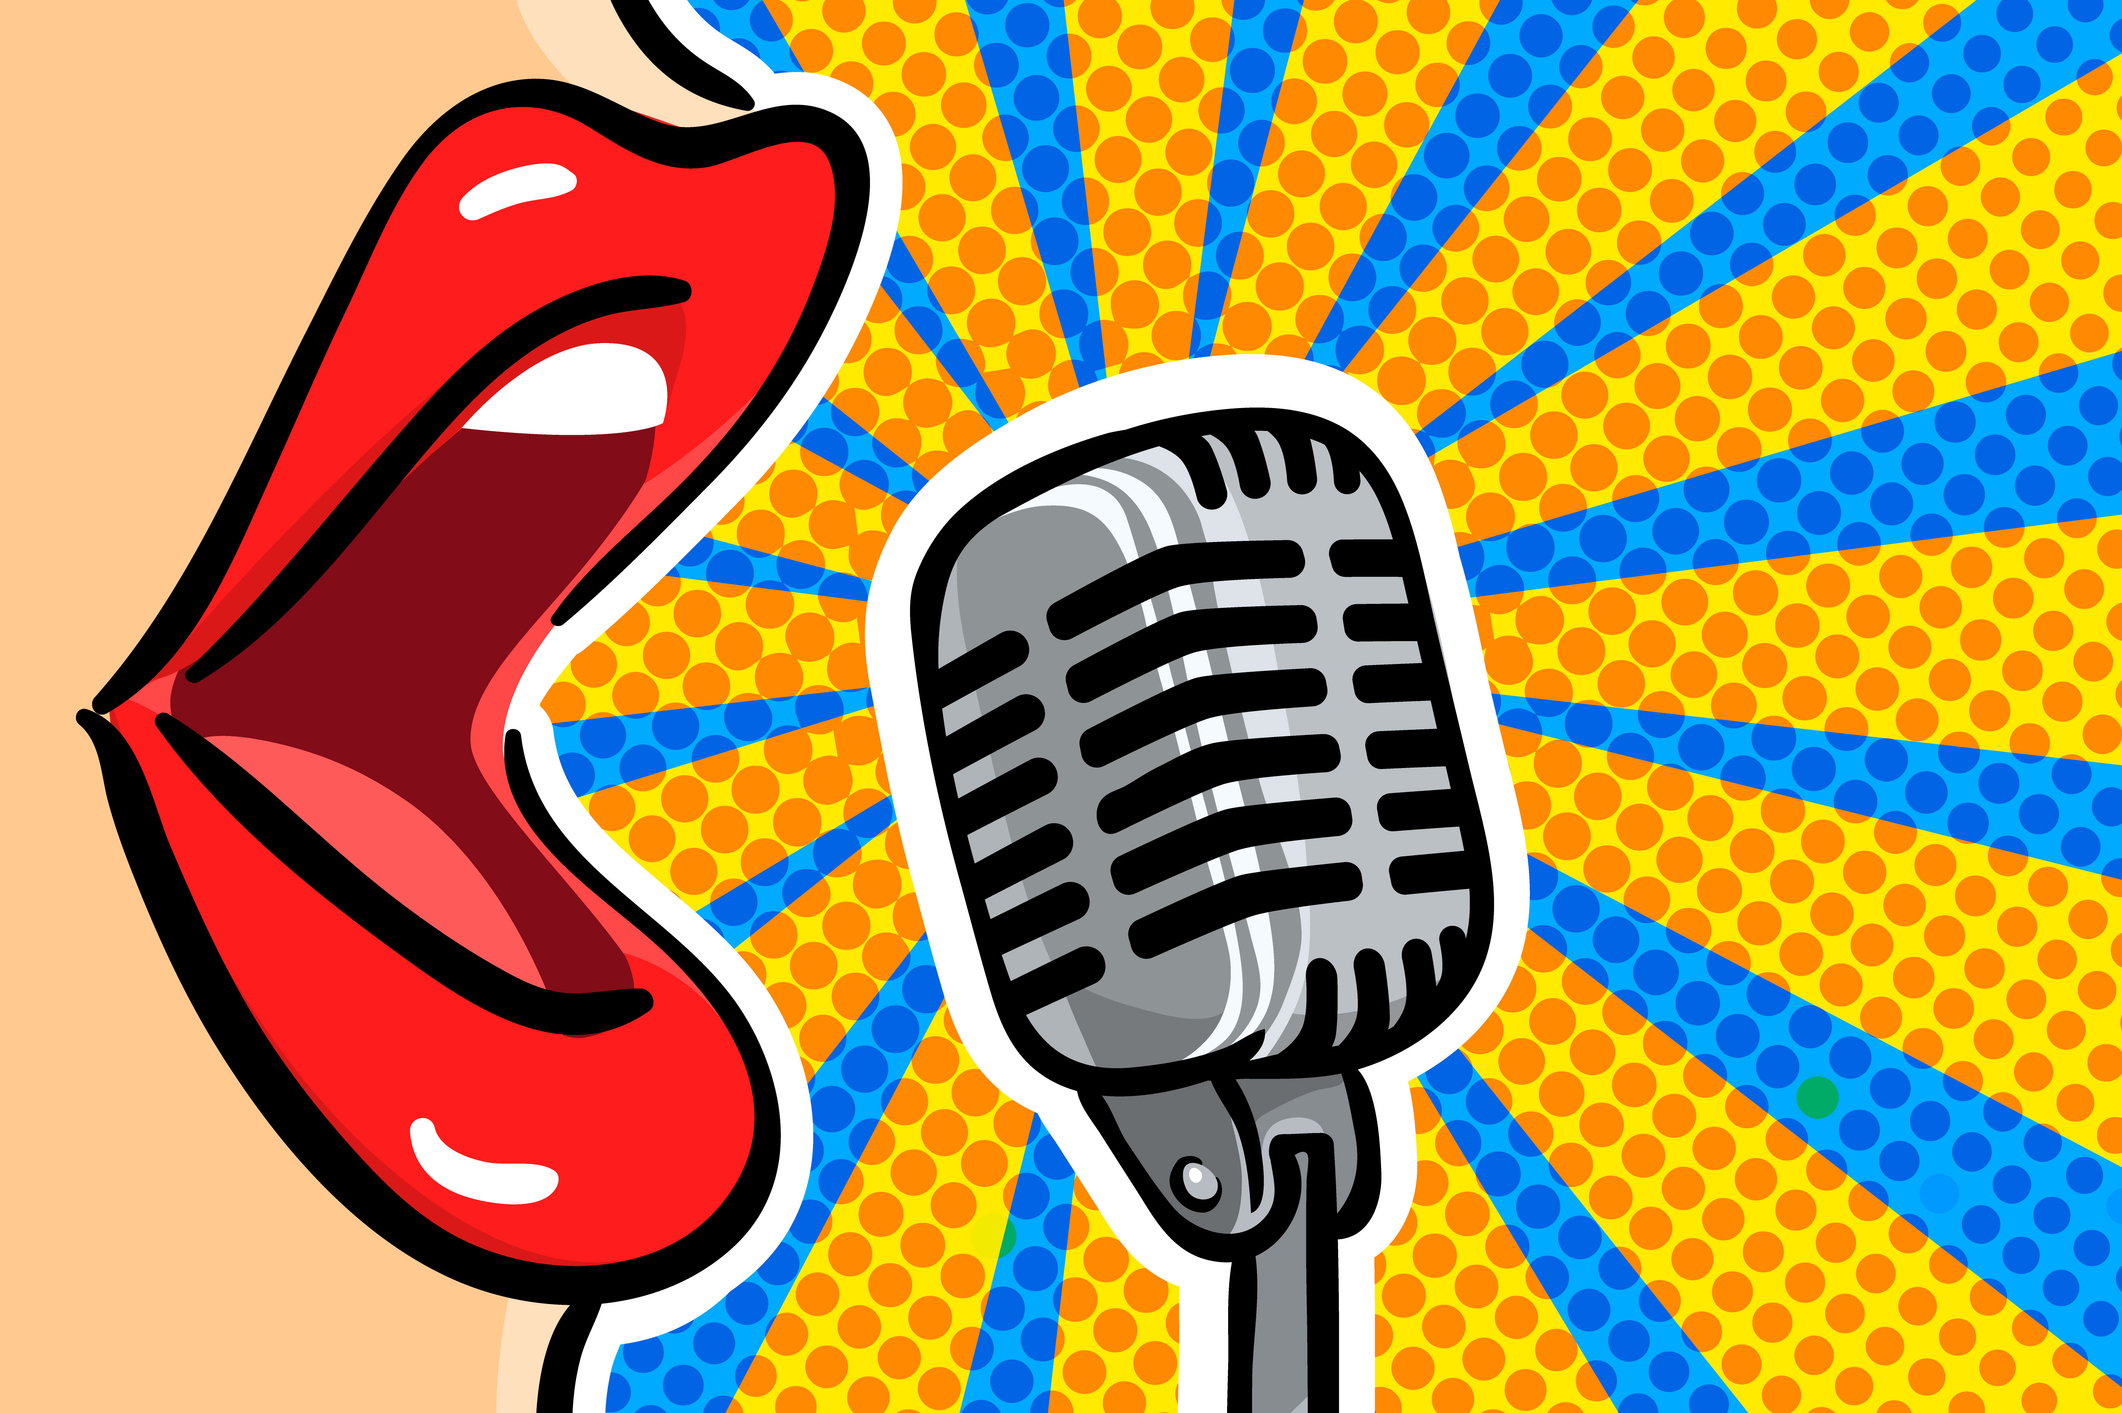 A pair of red painted lips singing into a 1950s-style microphone on a background of yellow and blue rays radiating out from the microphone.